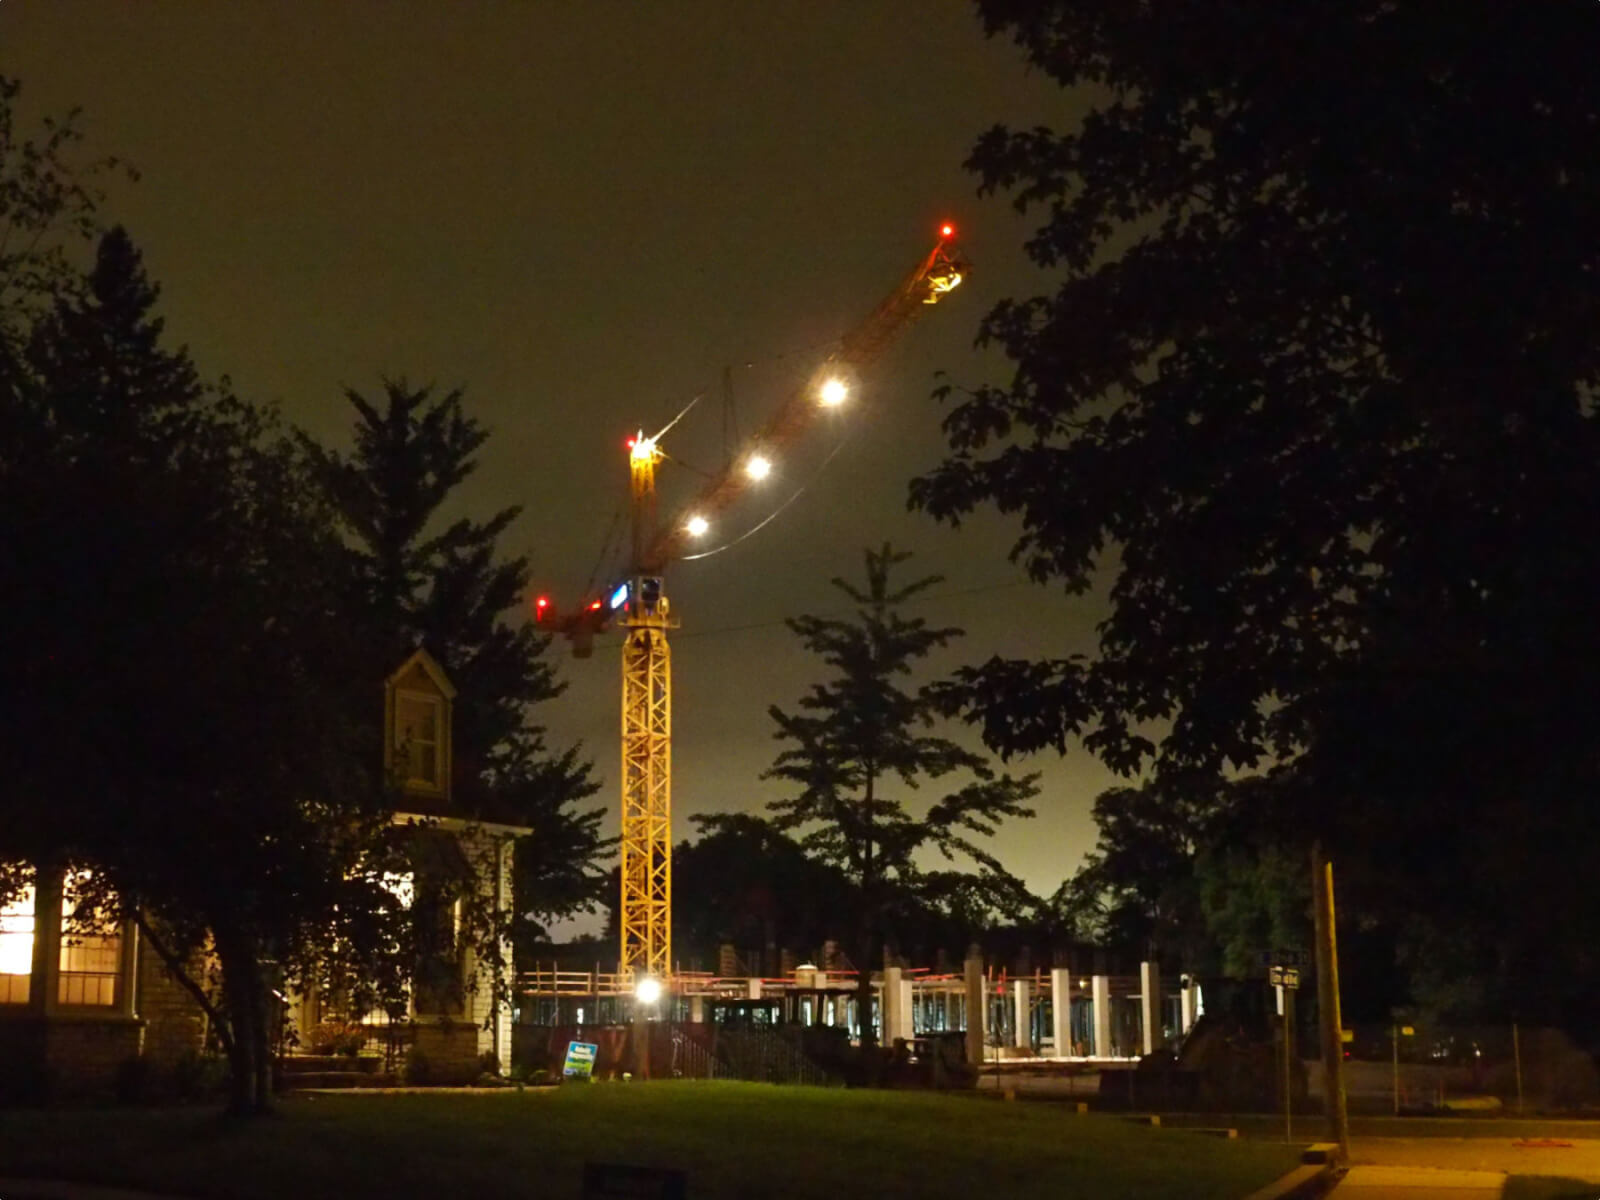 Crane over construction site at night